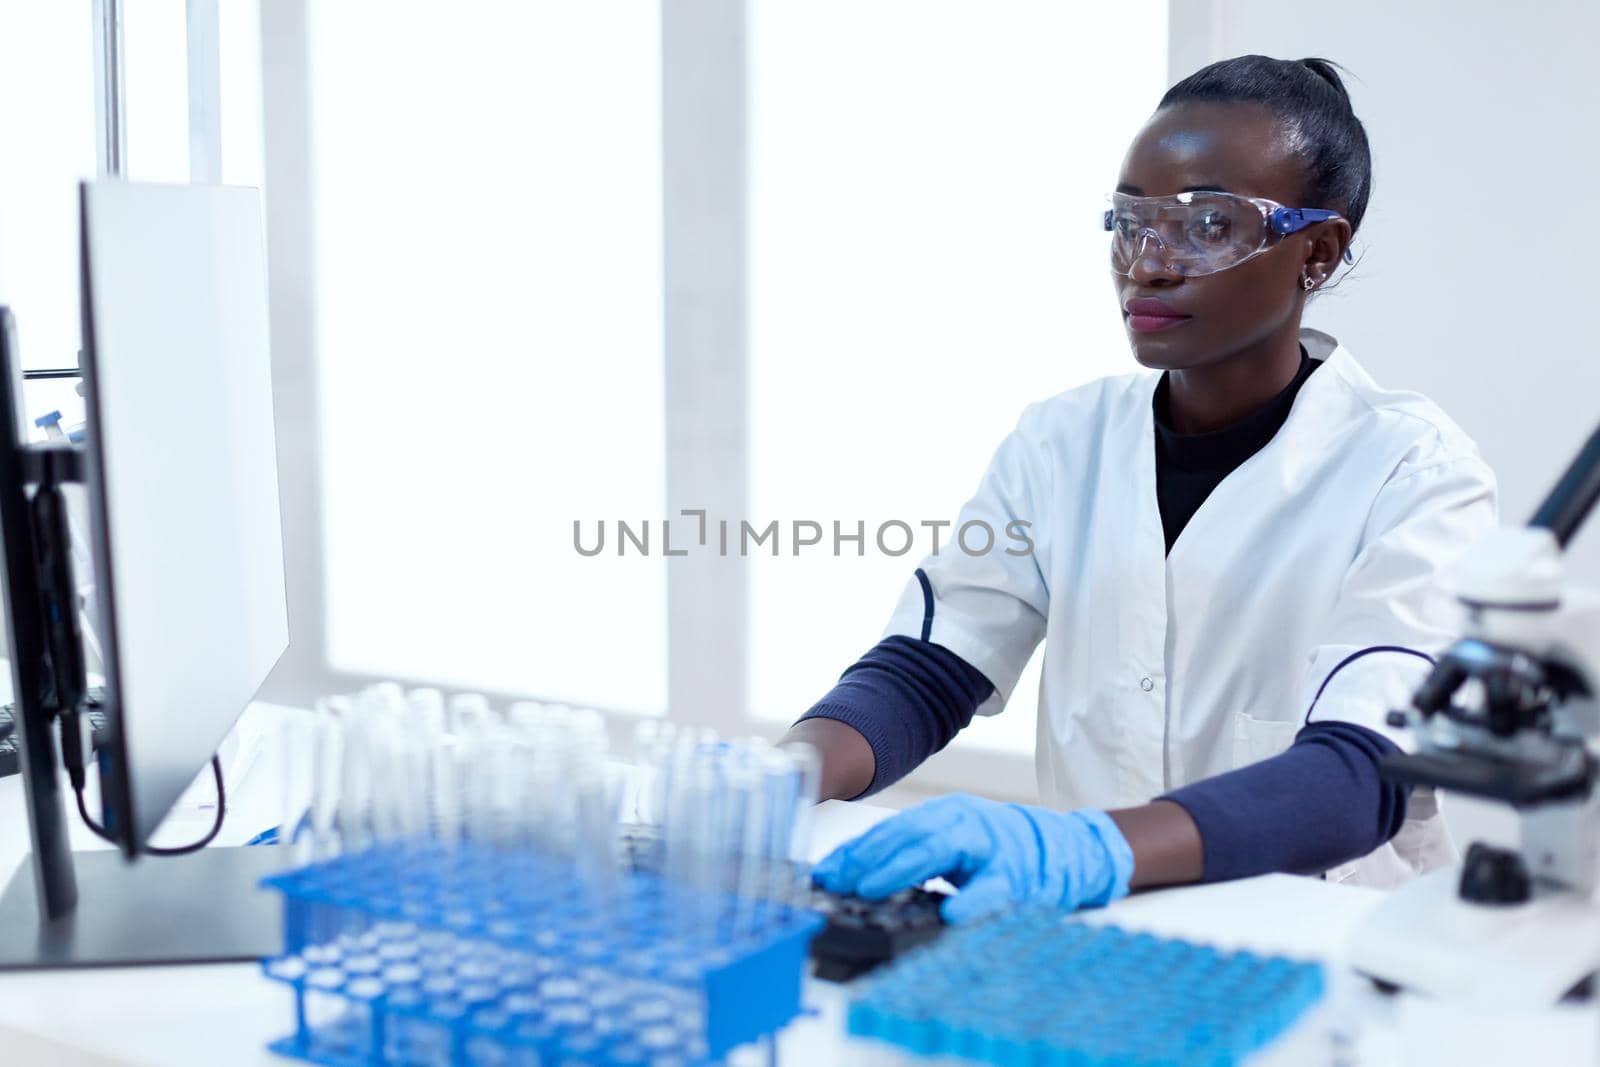 African biotechnology researcher works in bright modern laboratory using computer. Multi ethnic healthcare scientist in biochemistry facility wearing sterile equipment.